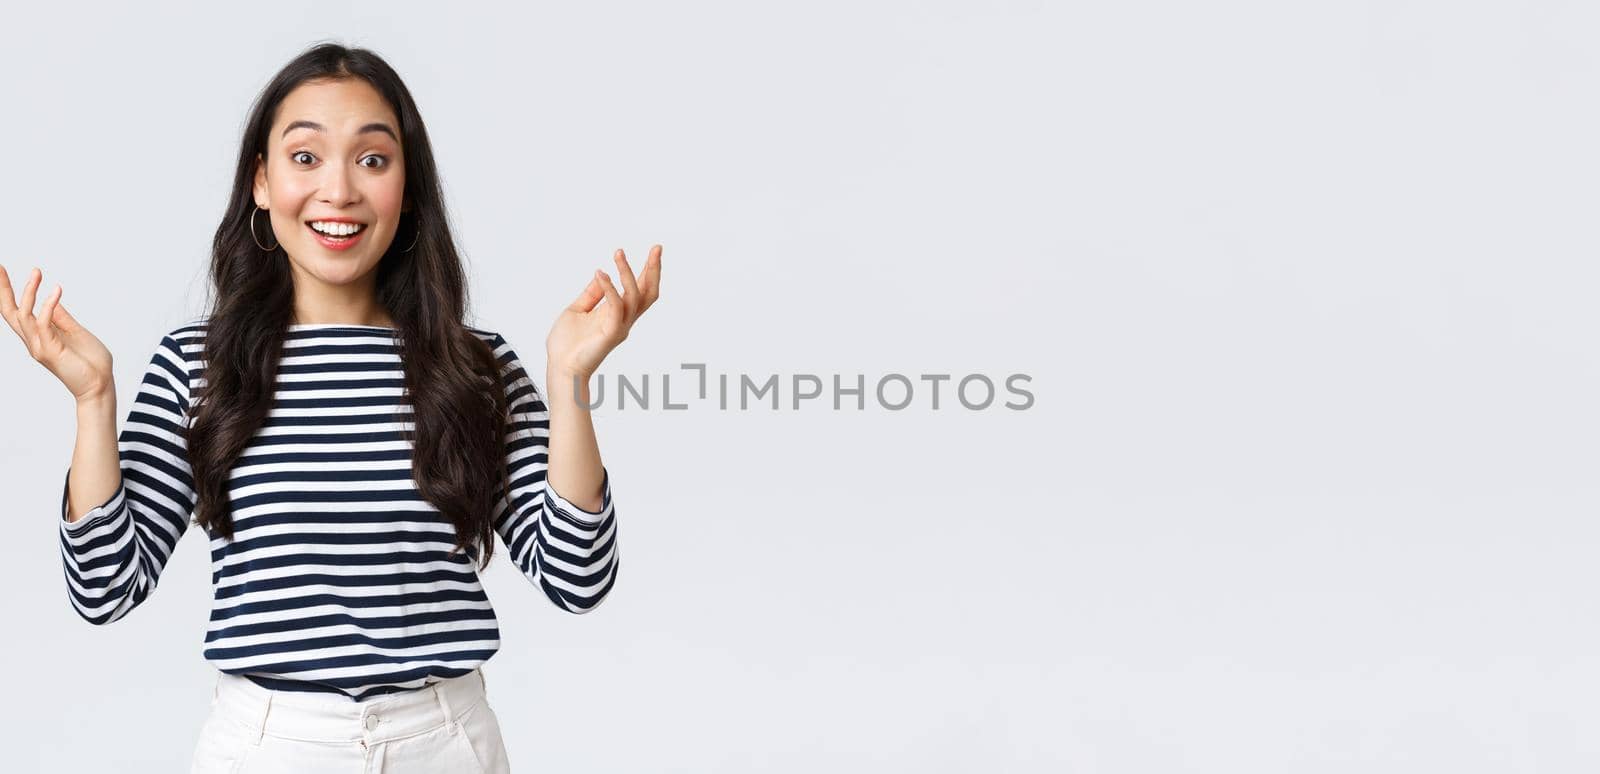 Lifestyle, beauty and fashion, people emotions concept. Surprised and amazed happy smiling asian woman find out perfect news, raise hands up astonished, congratulating or praising friend by Benzoix